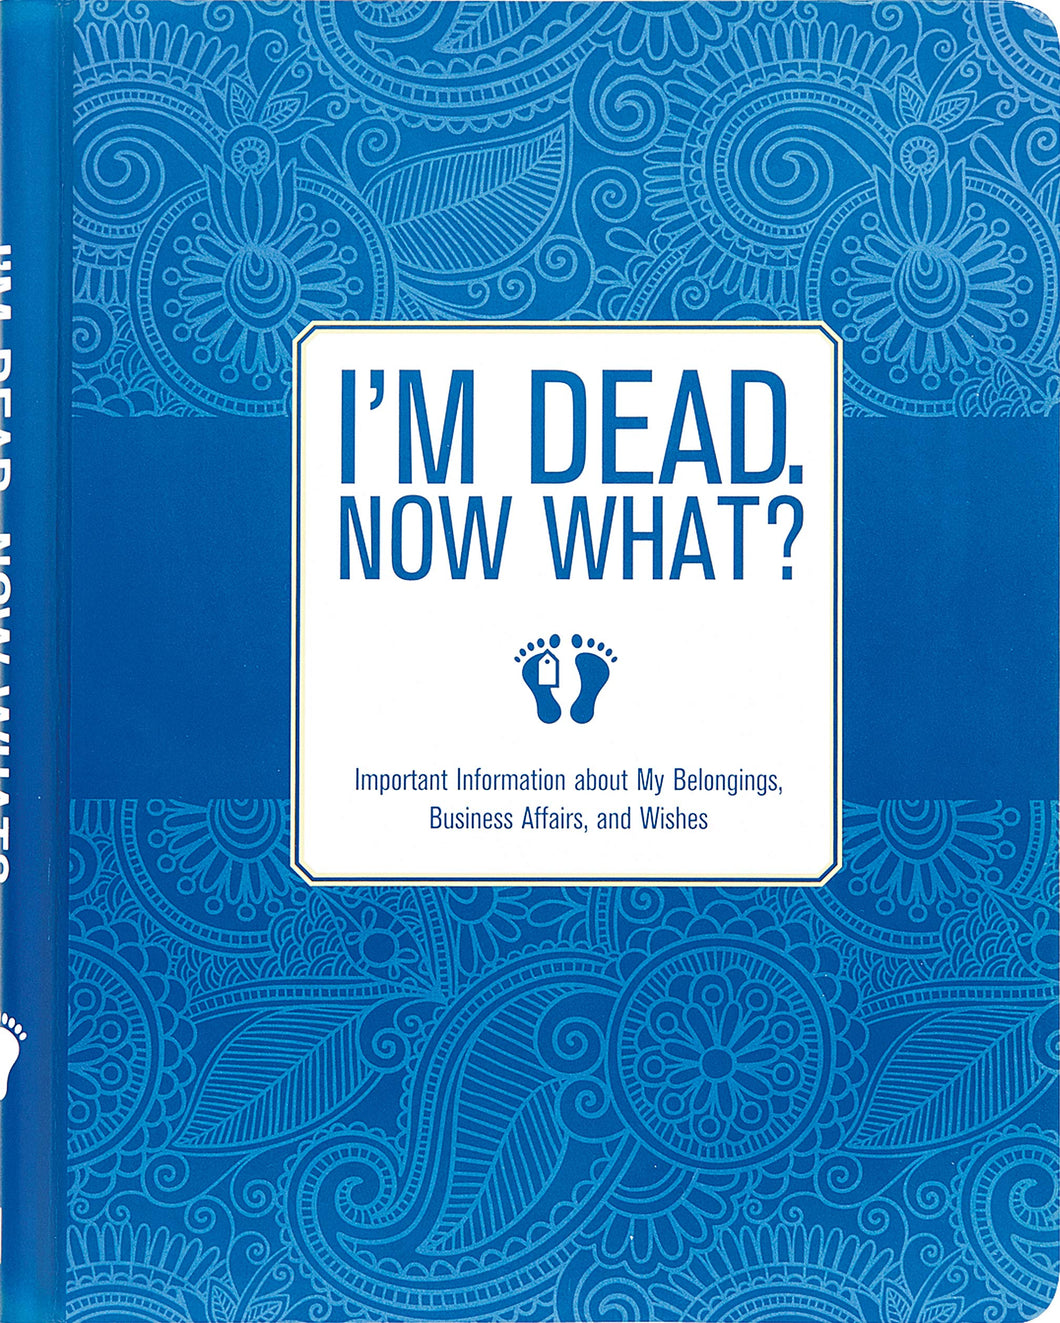 I'm Dead. Now What? Important Information About My Belongings, Business Affairs, & Wishes